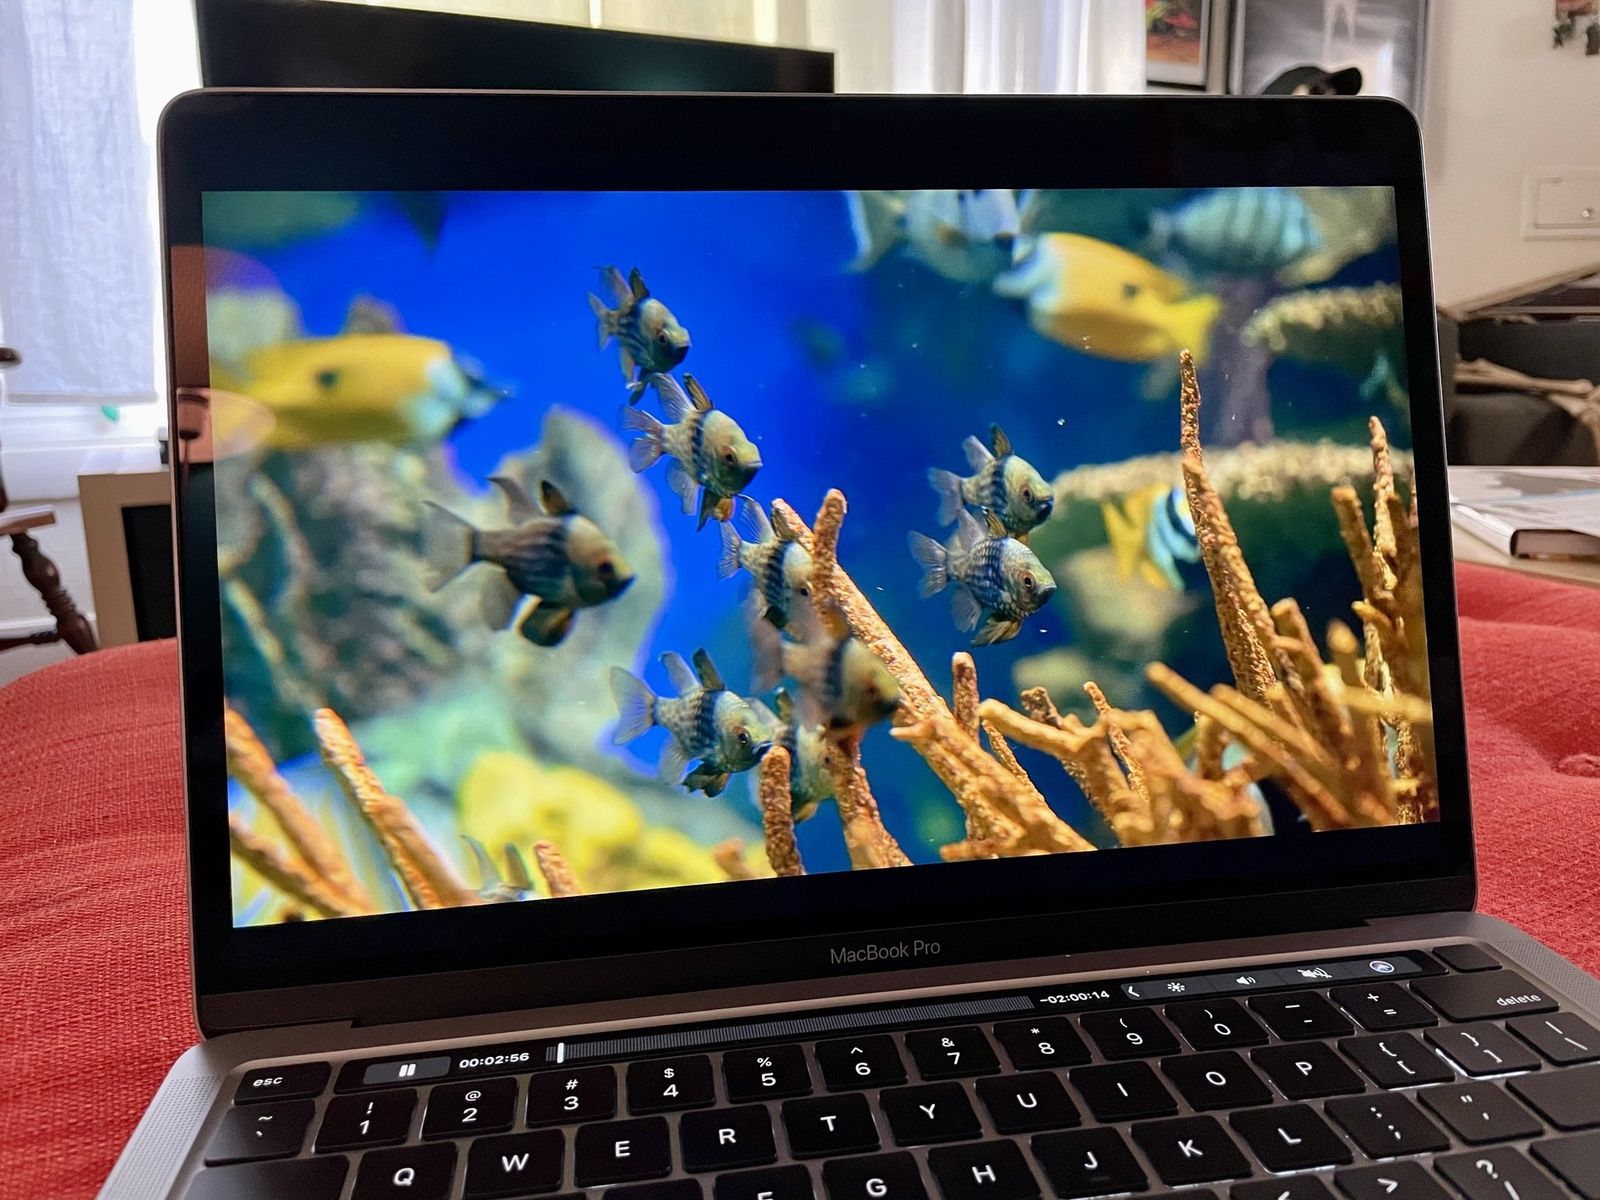 Macbook Pro With M1 Chip with a fish tank video playing on the screen